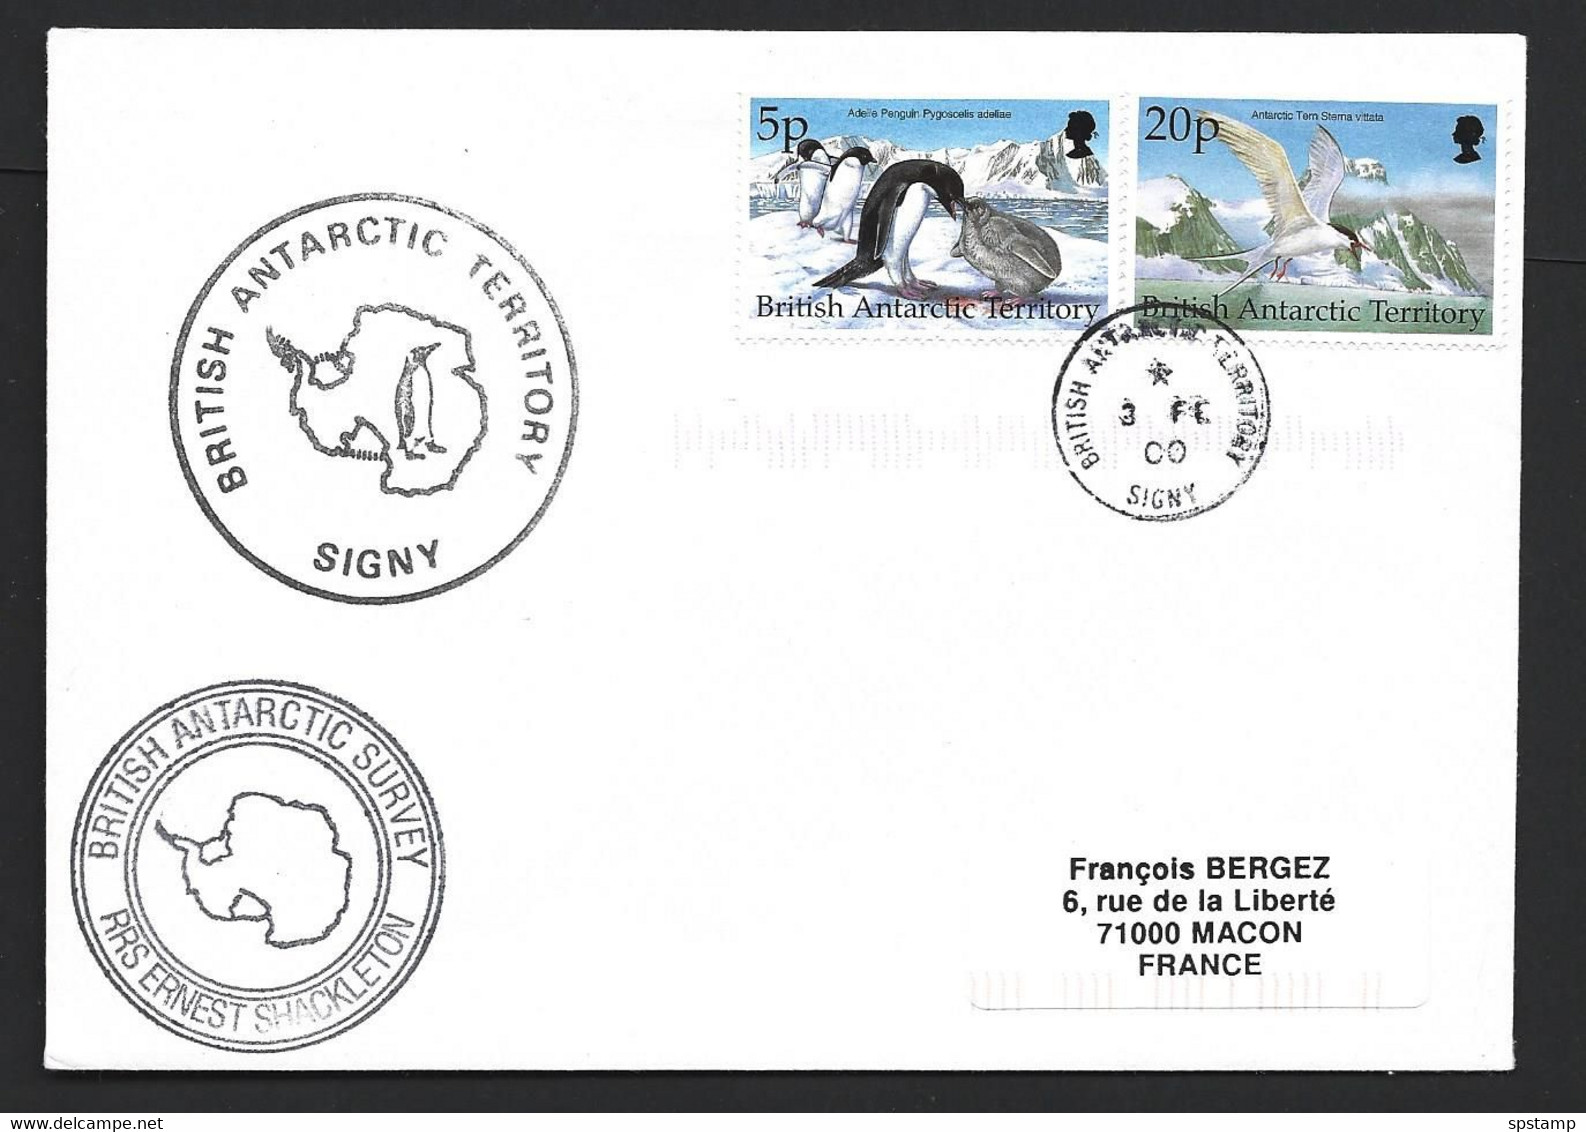 British Antarctic Territory 2000 Multi Cacheted Cover Signy To France - Storia Postale